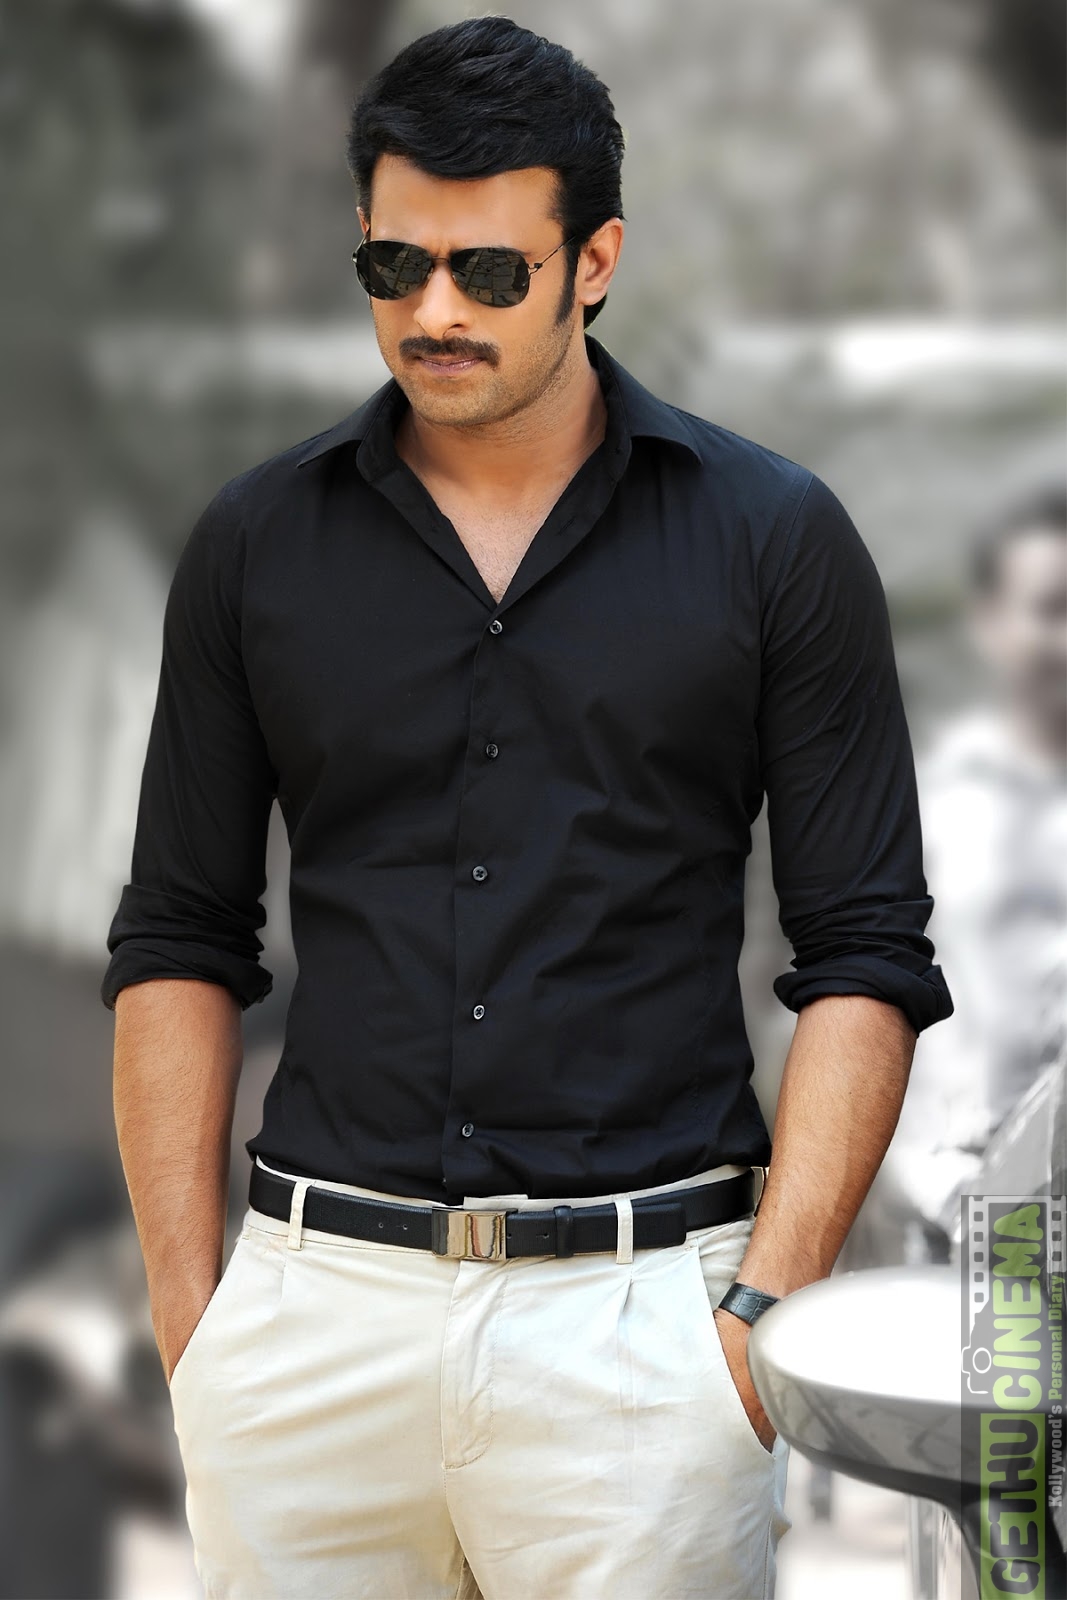 After 5 years, Prabhas will be seen outside Baahubali ...